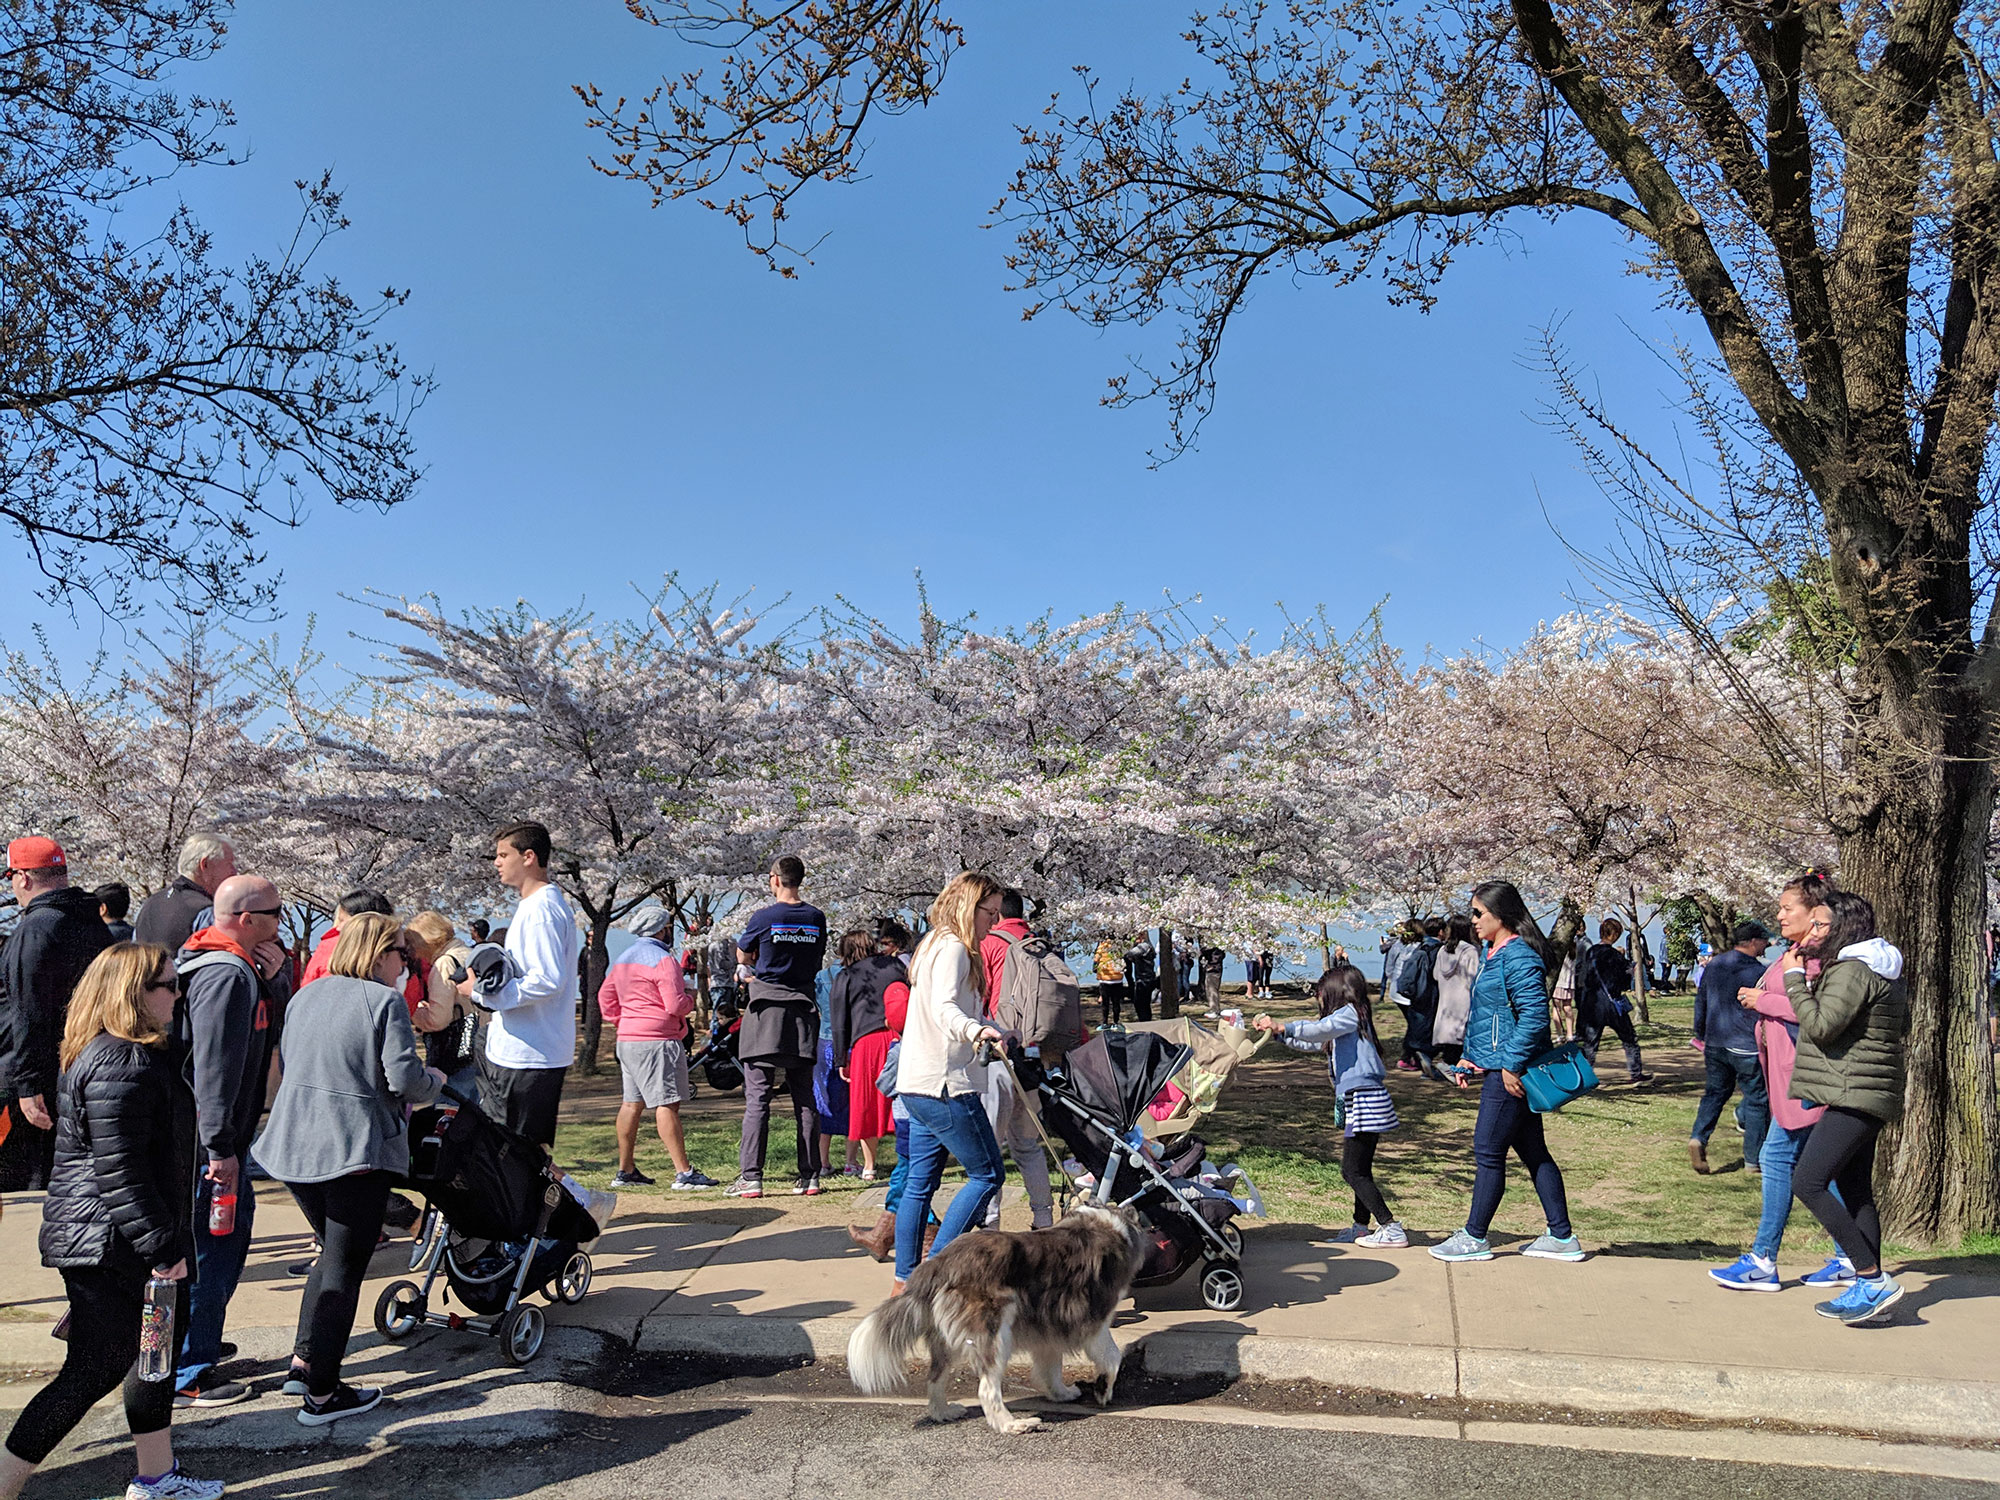 The Washington D.C. tidal basin mobbed by tourists during Cherry Blossom season.